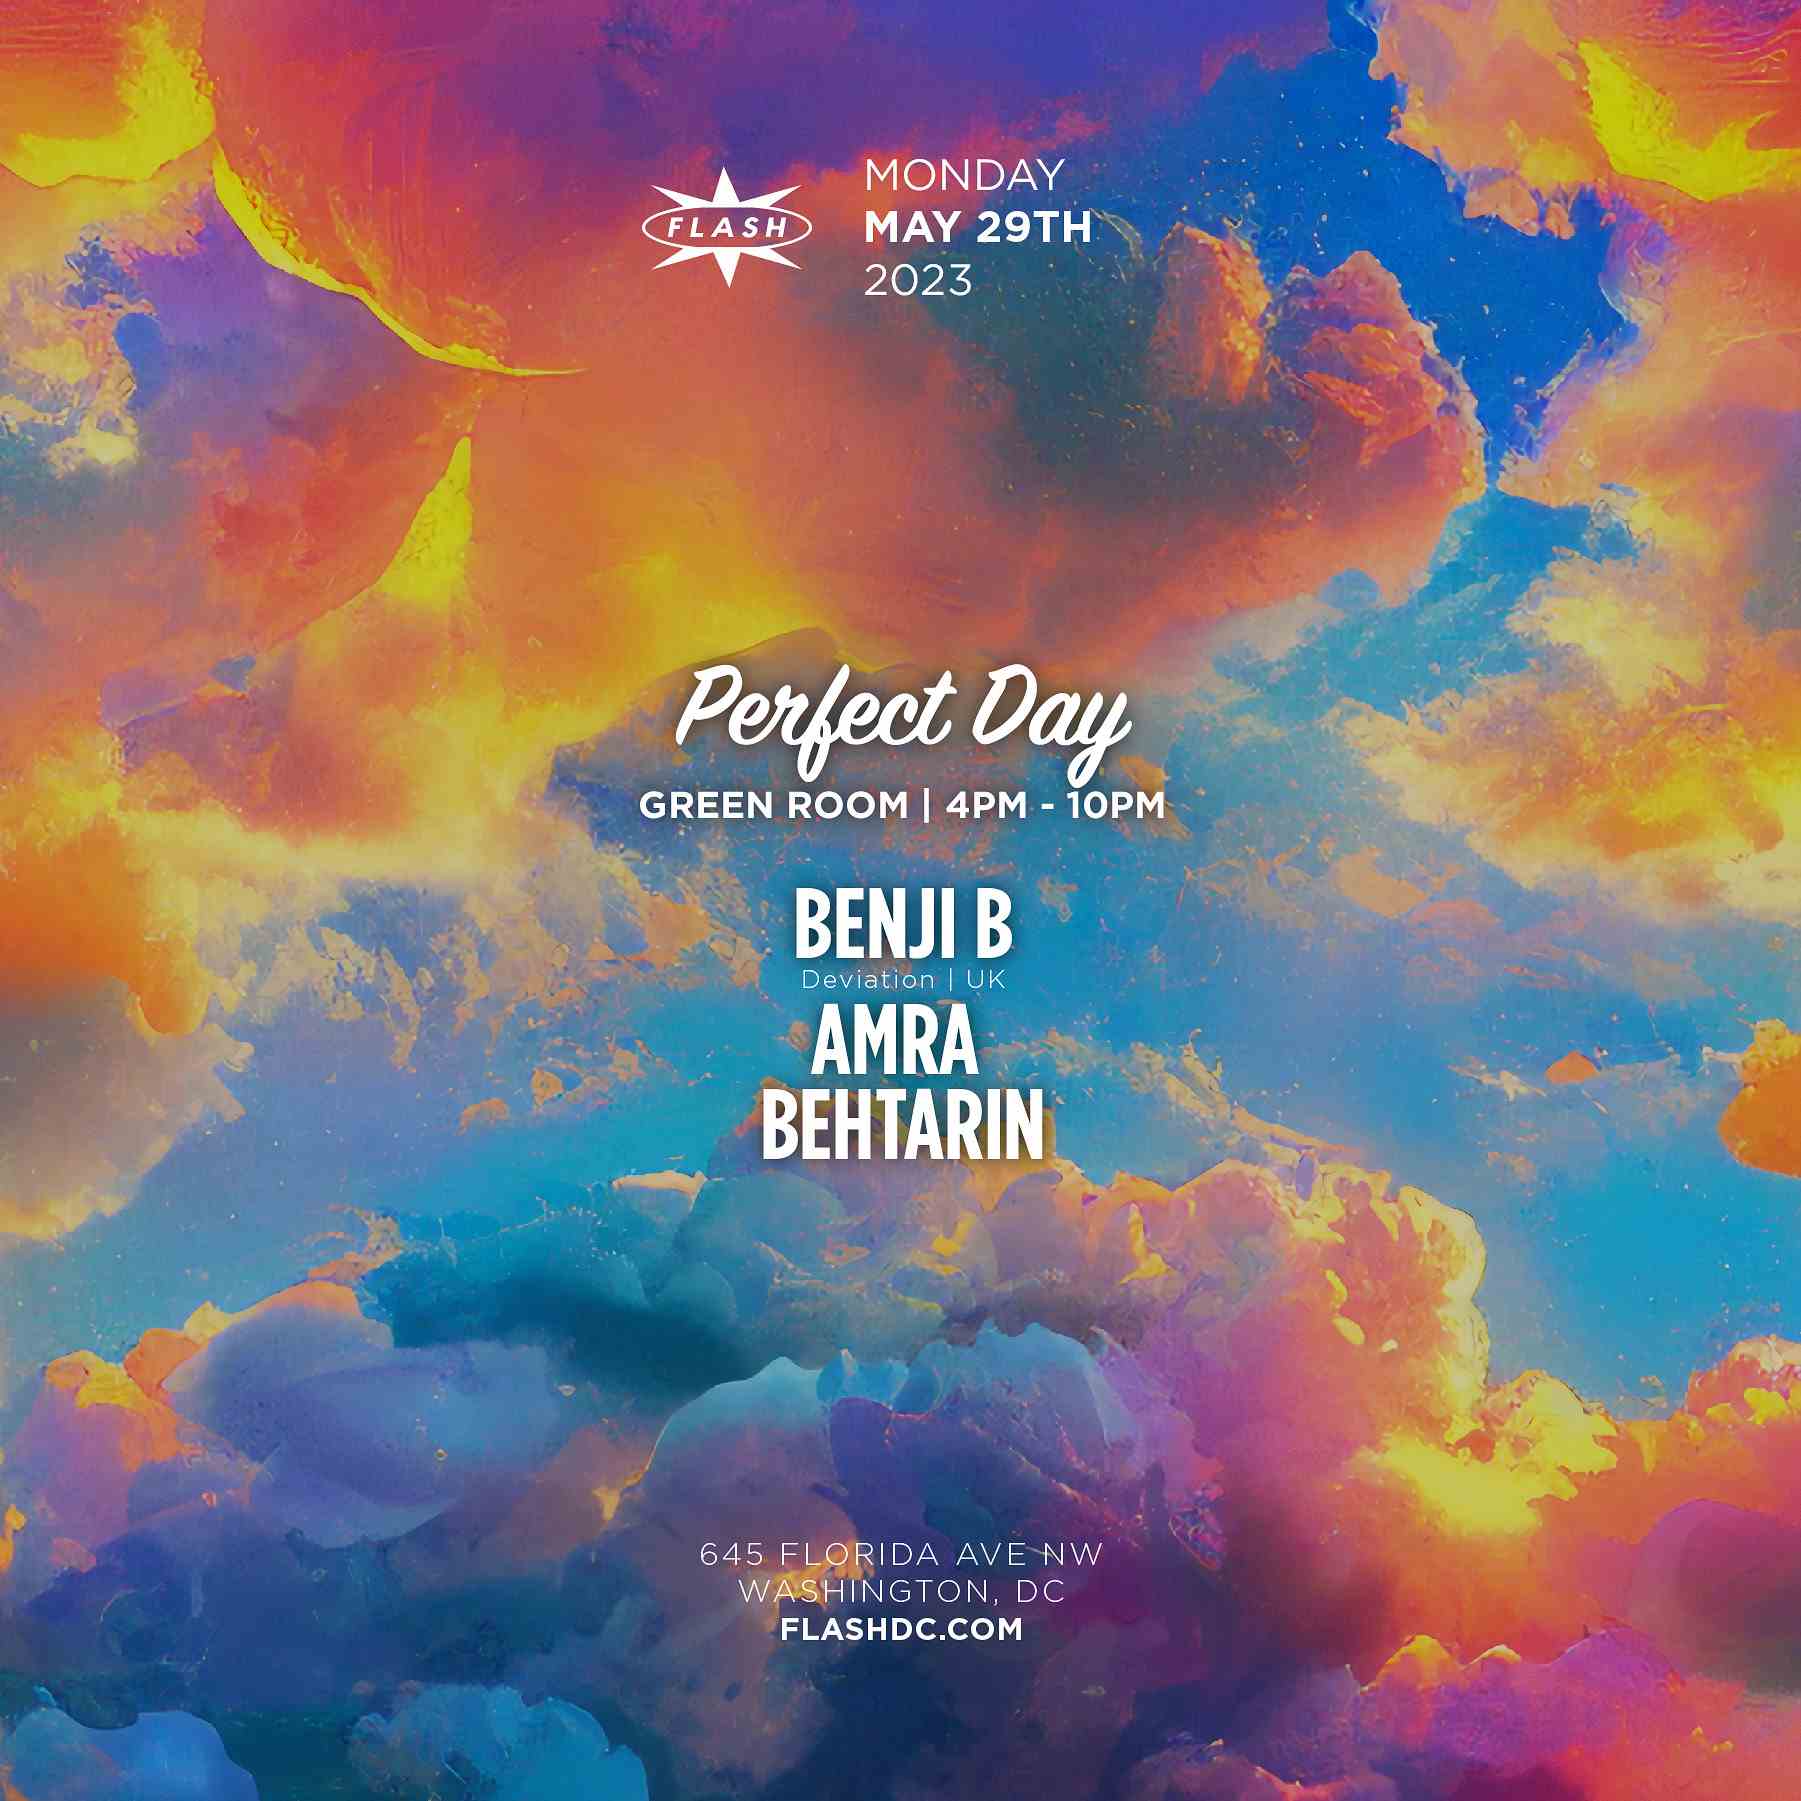 Event image for Perfect Day: Benji B - Amra - BehTarin